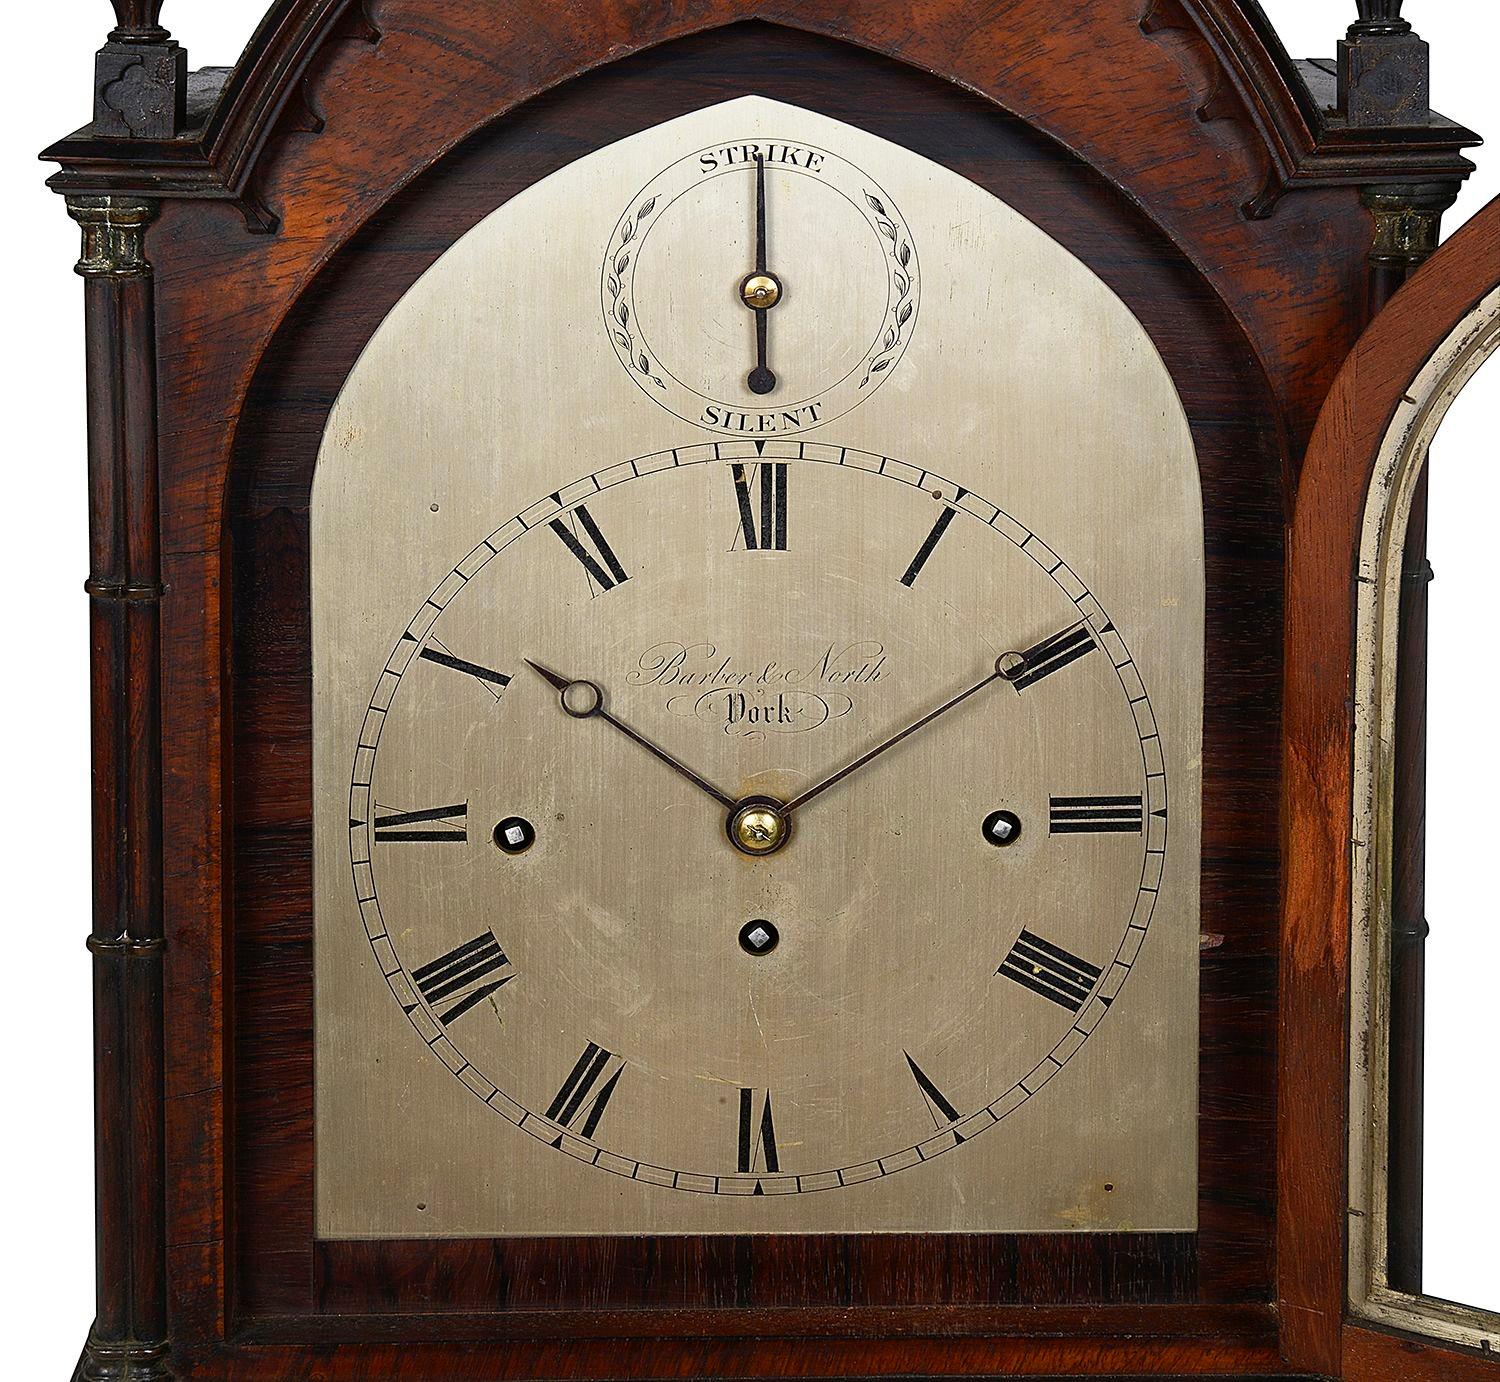 A very good quality Regency period Mahogany Gothic influenced mantel clock, having delicate carved finials, cluster columns to the sides, the silvered dial with Roman numerals, a three train movement, strike / silent feature, an eight day duration,